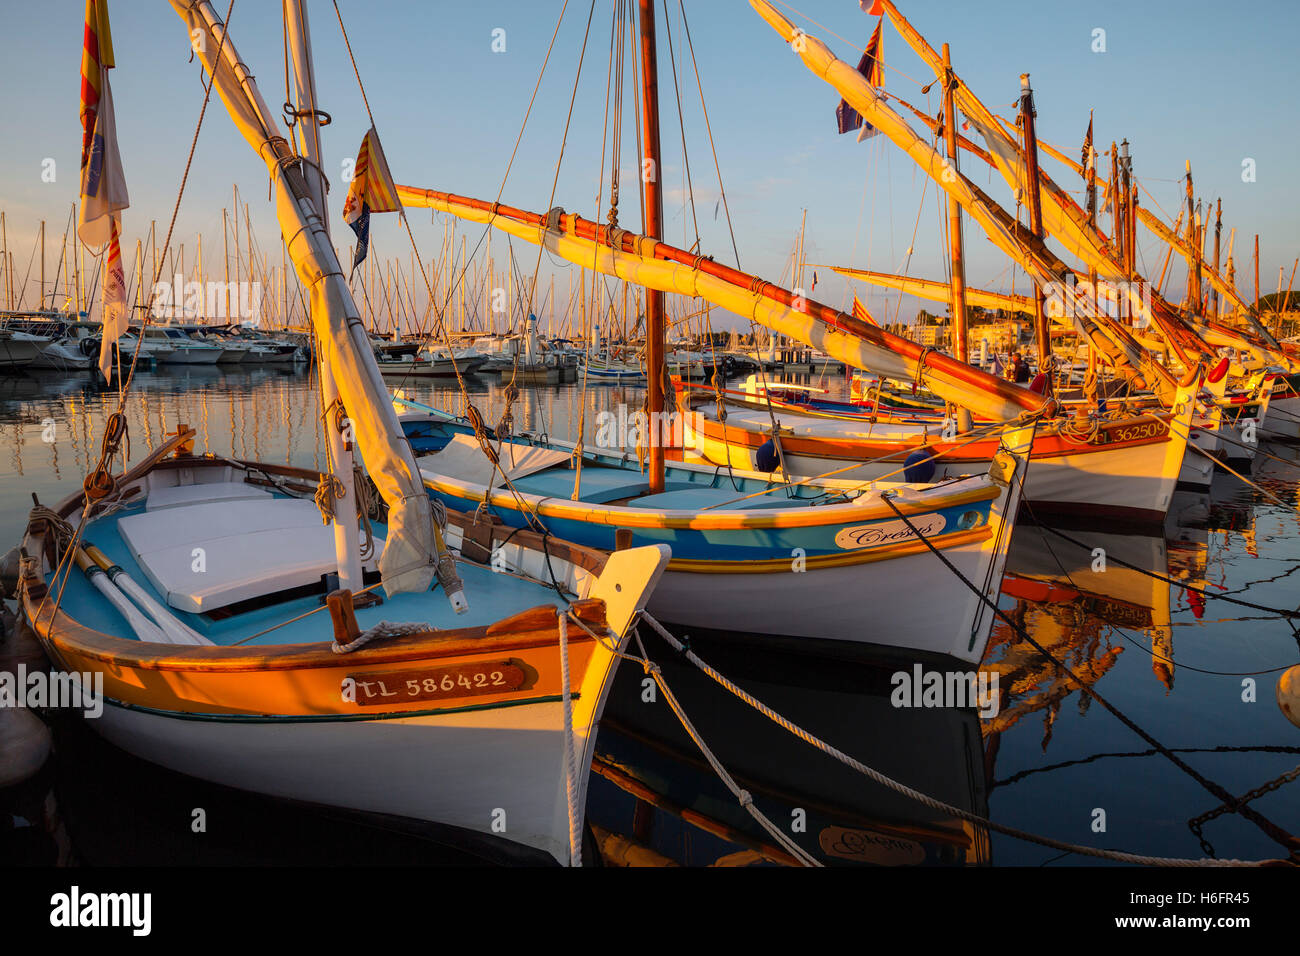 Fishing boats at fishing port, Marina, old harbour. Village of Bandol. Var department, Provence Alpes Cote d'Azur French Riviera Stock Photo